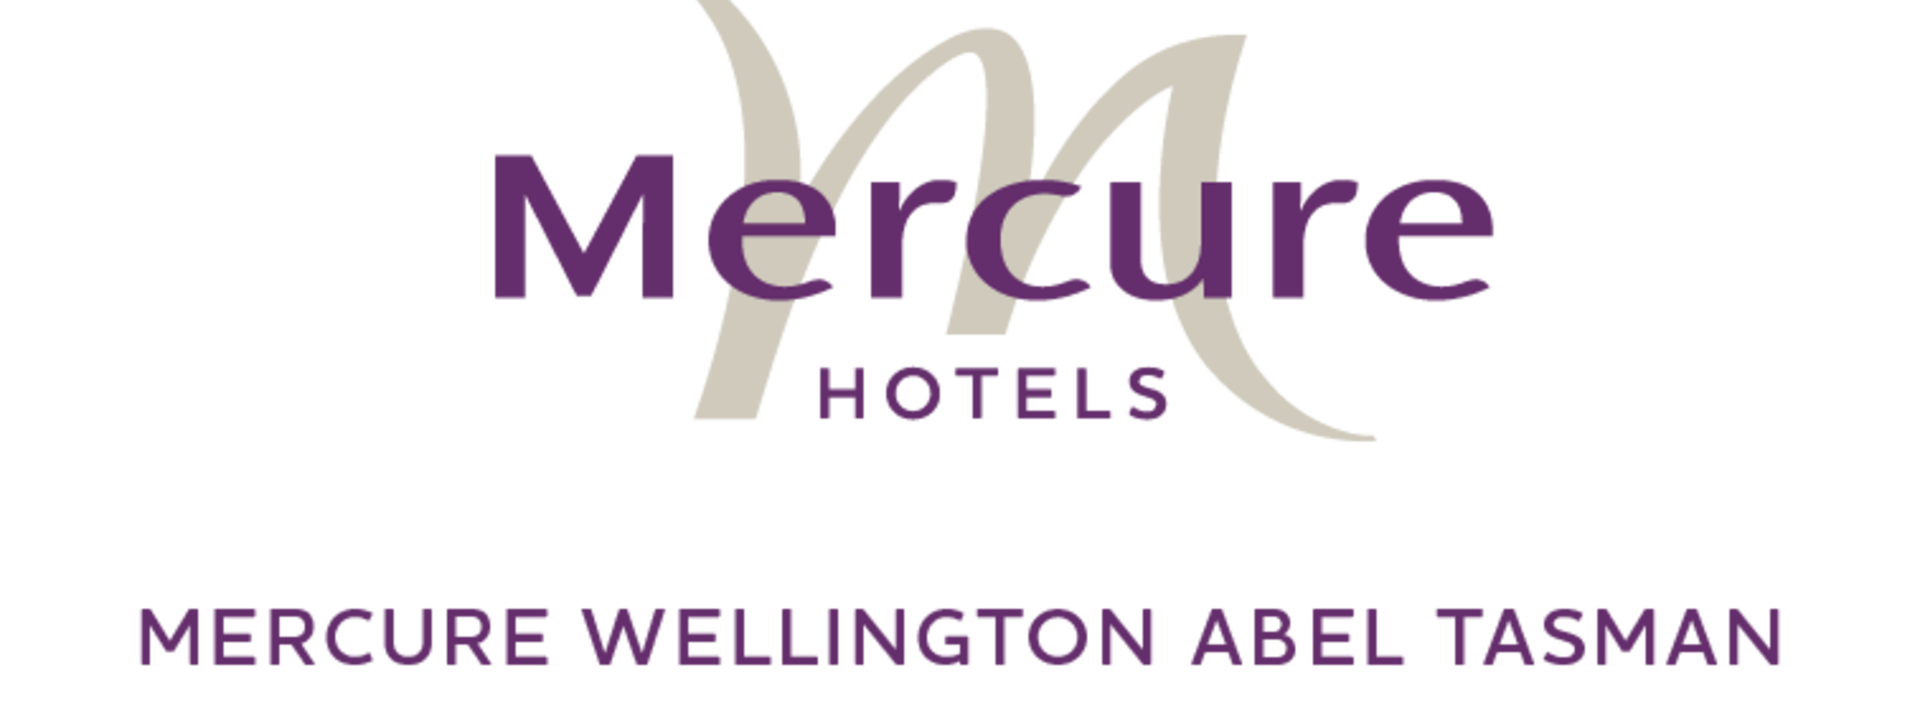 mecure-logo-with-name.png